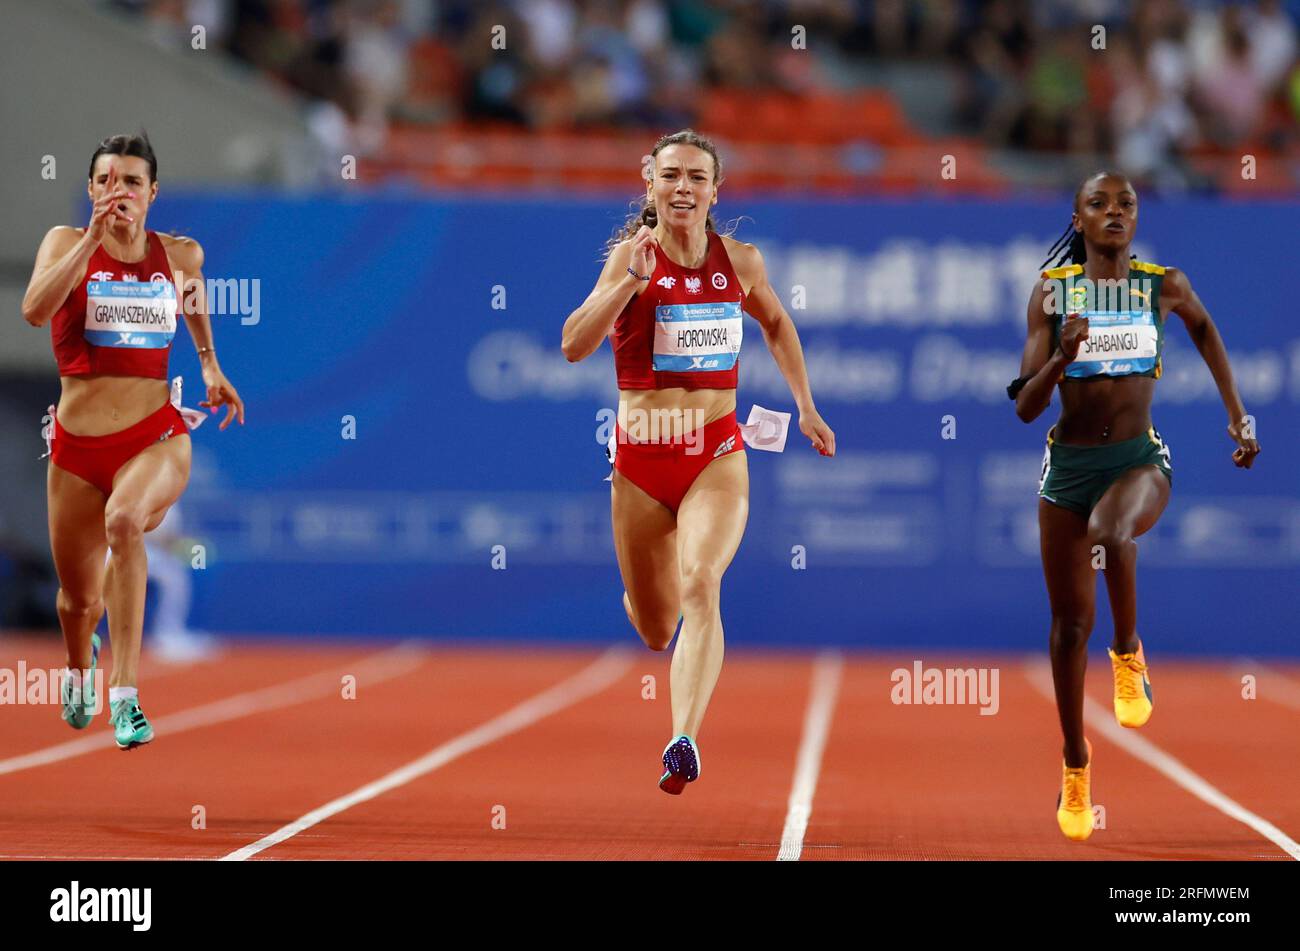 Chengdu, China's Sichuan Province. 4th Aug, 2023. Gold medalist Nikola Horowska (C) of Poland, Silver medalist Marlena Granaszewska (L) of Poland and bronze medalist Banele Withney Shabangu of South Africa compete during the Women's 200m Final of athletics at the 31st FISU Summer World University Games in Chengdu, southwest China's Sichuan Province, Aug. 4, 2023. Credit: Jia Haocheng/Xinhua/Alamy Live News Stock Photo